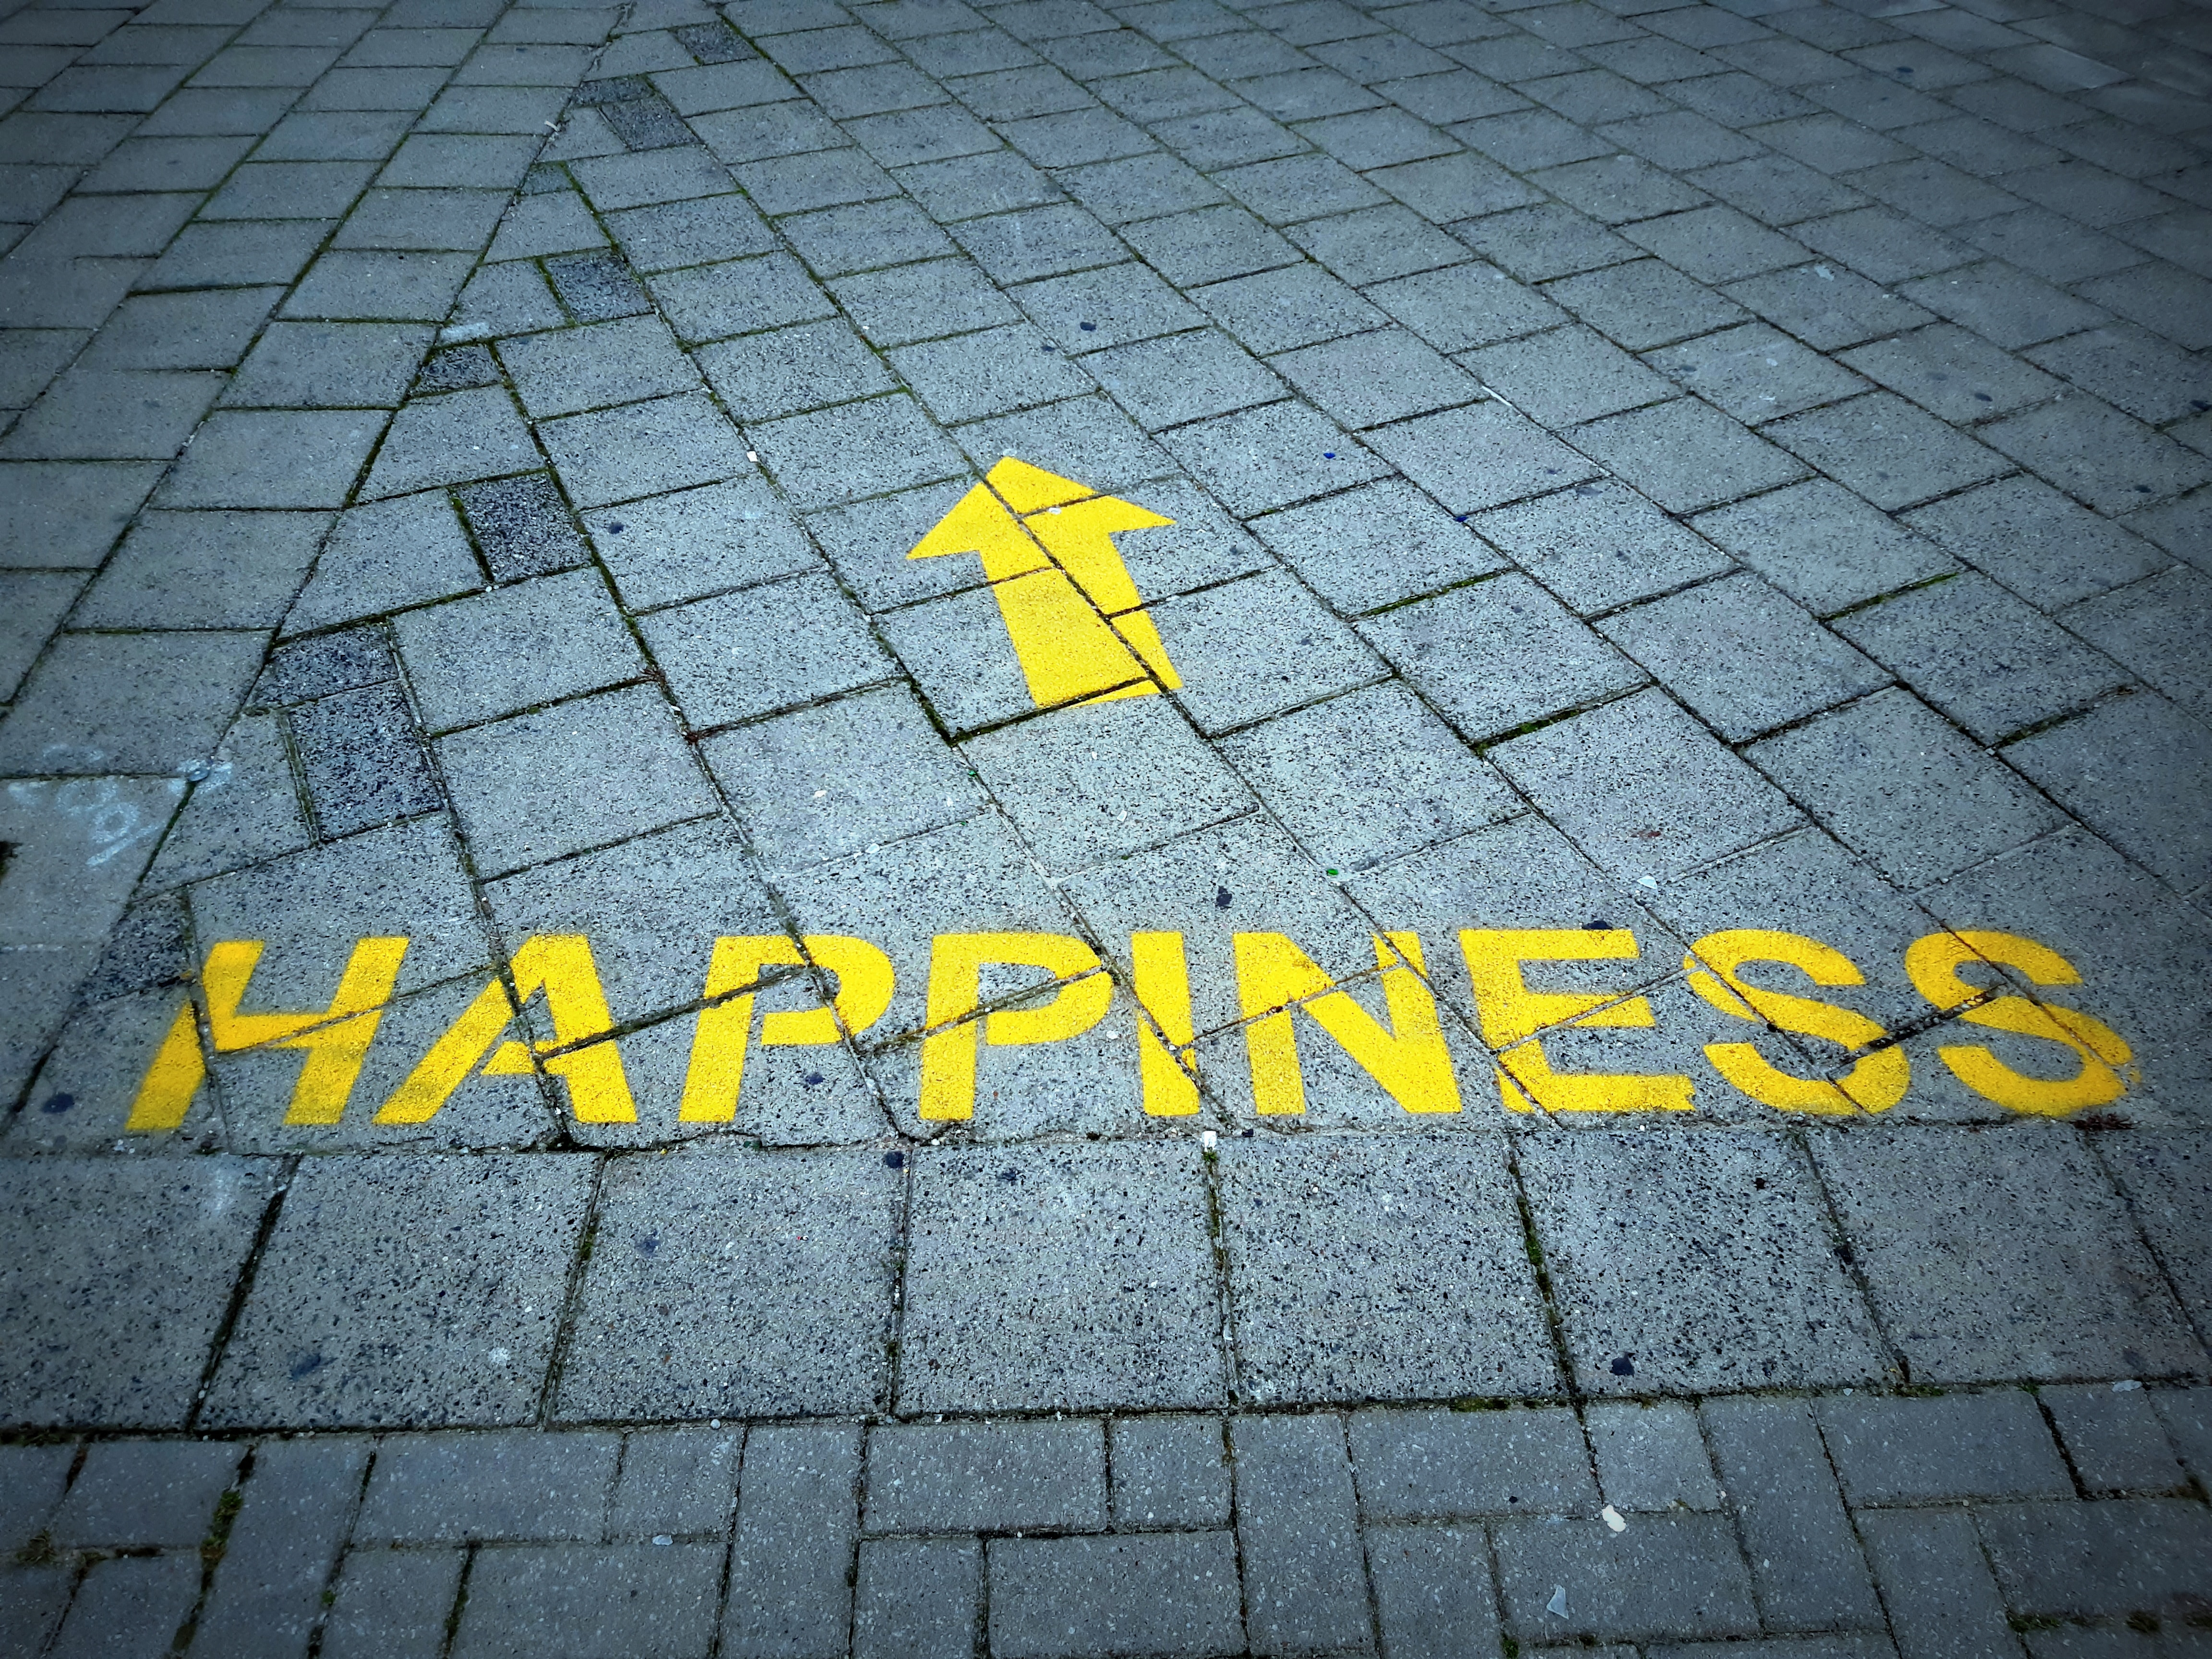 A gray concrete brick path with a bright yellow arrow and the word HAPPINESS in all caps, indicating a path to happiness.